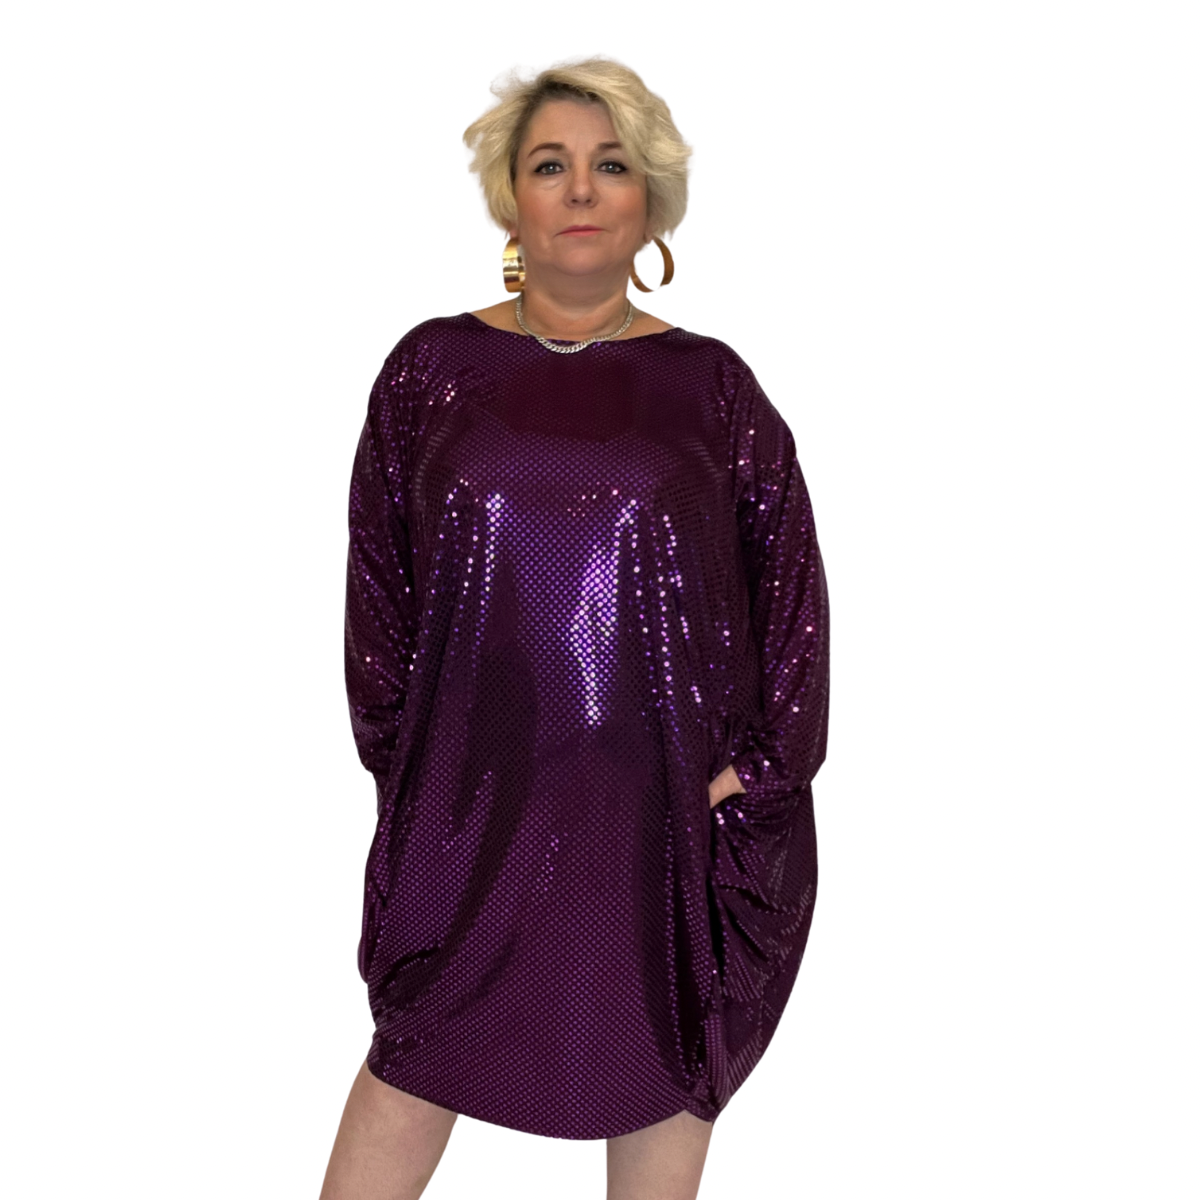 PURPLE SPARKLY SEQUIN LOOSE FITTED DIPPED HEM DRESS WITH POCKETS